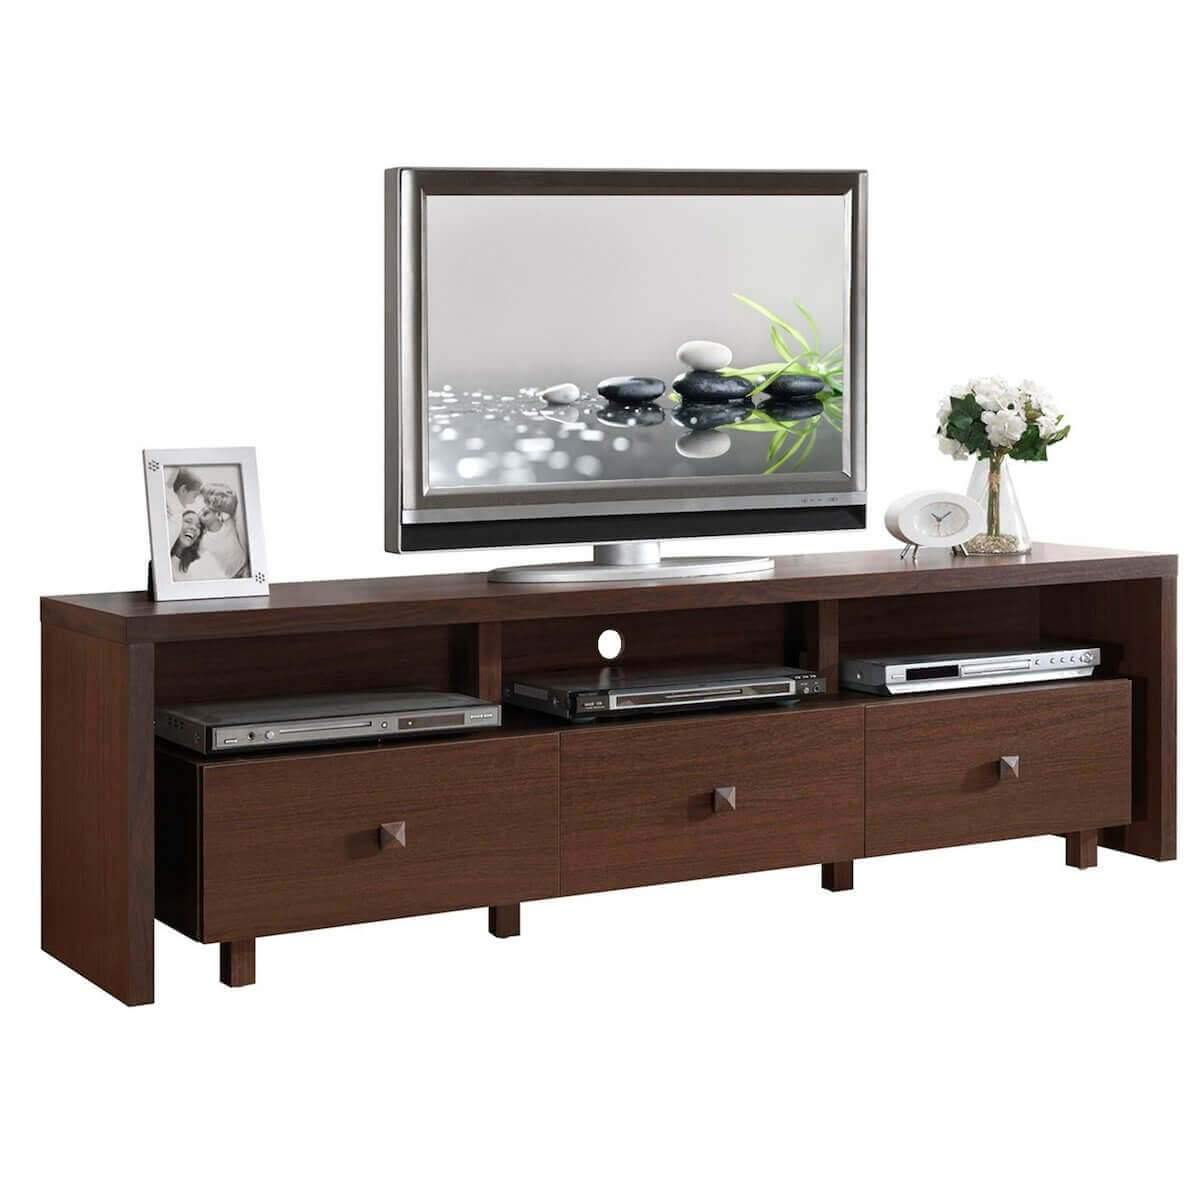 Techni Mobili Hickory Elegant TV Stand for TV's Up To 75" with Storage RTA-8895-HRY with TV